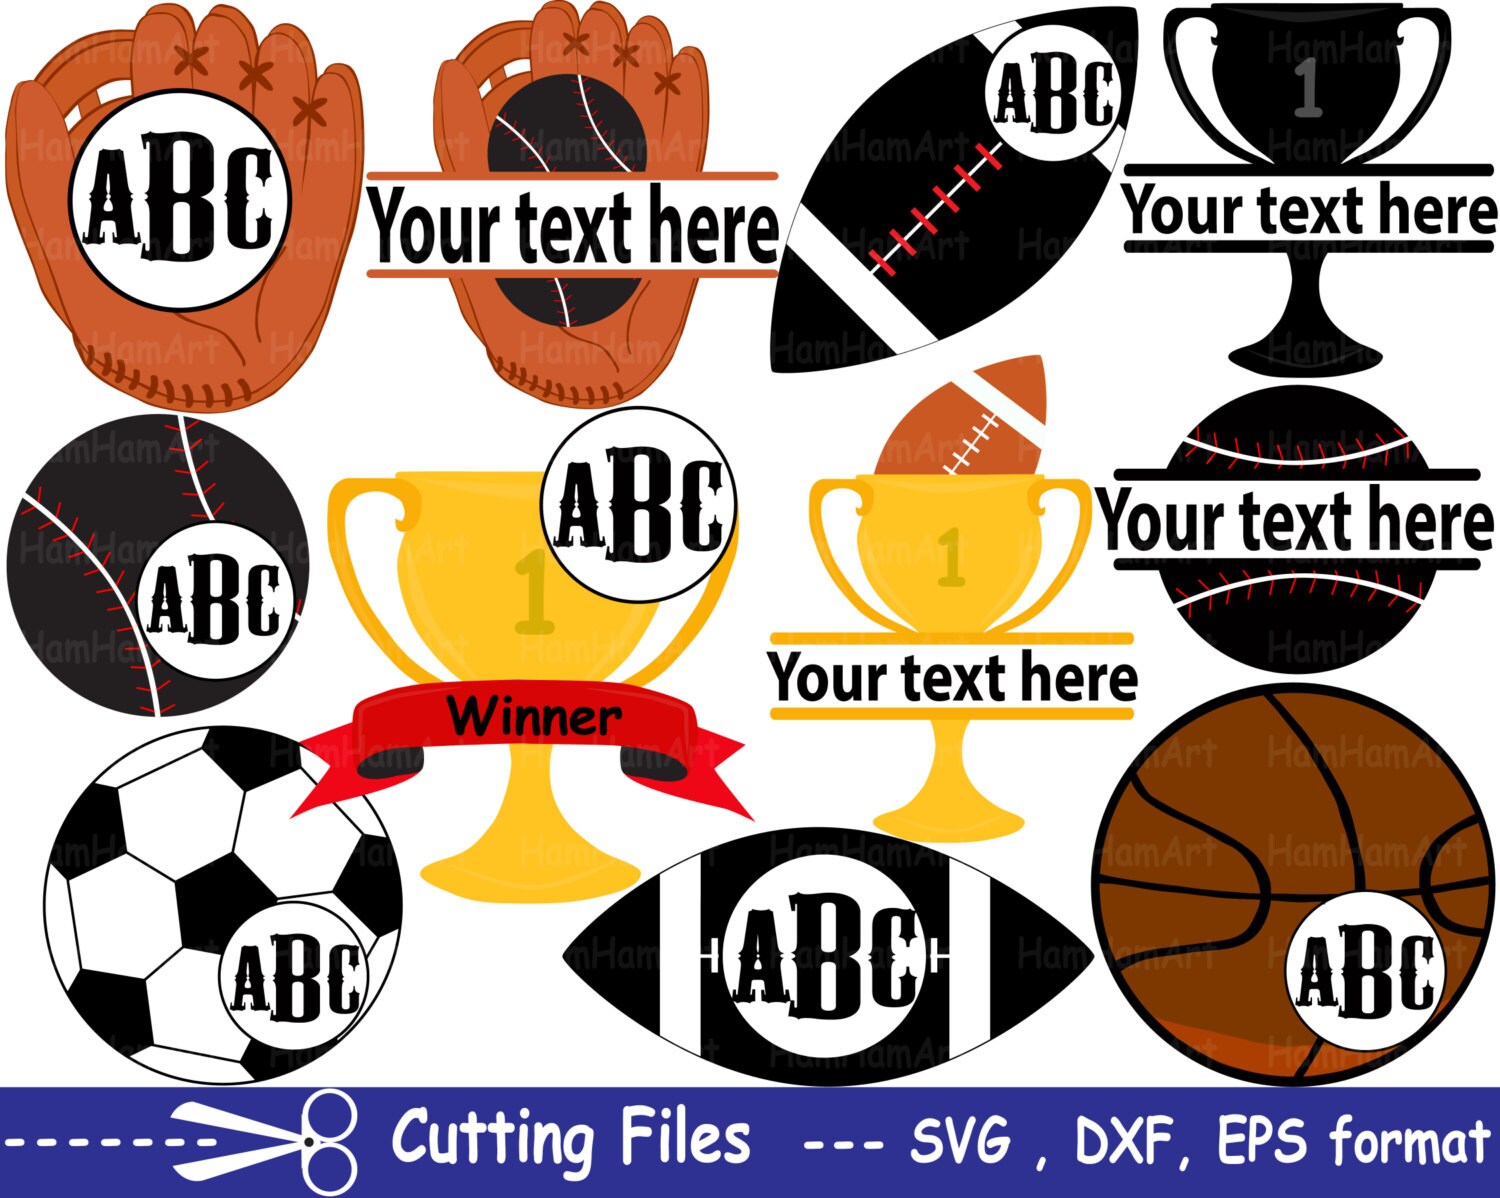 Download Cutting files SVG DXFEPSpng Sports items Logo Vinyl